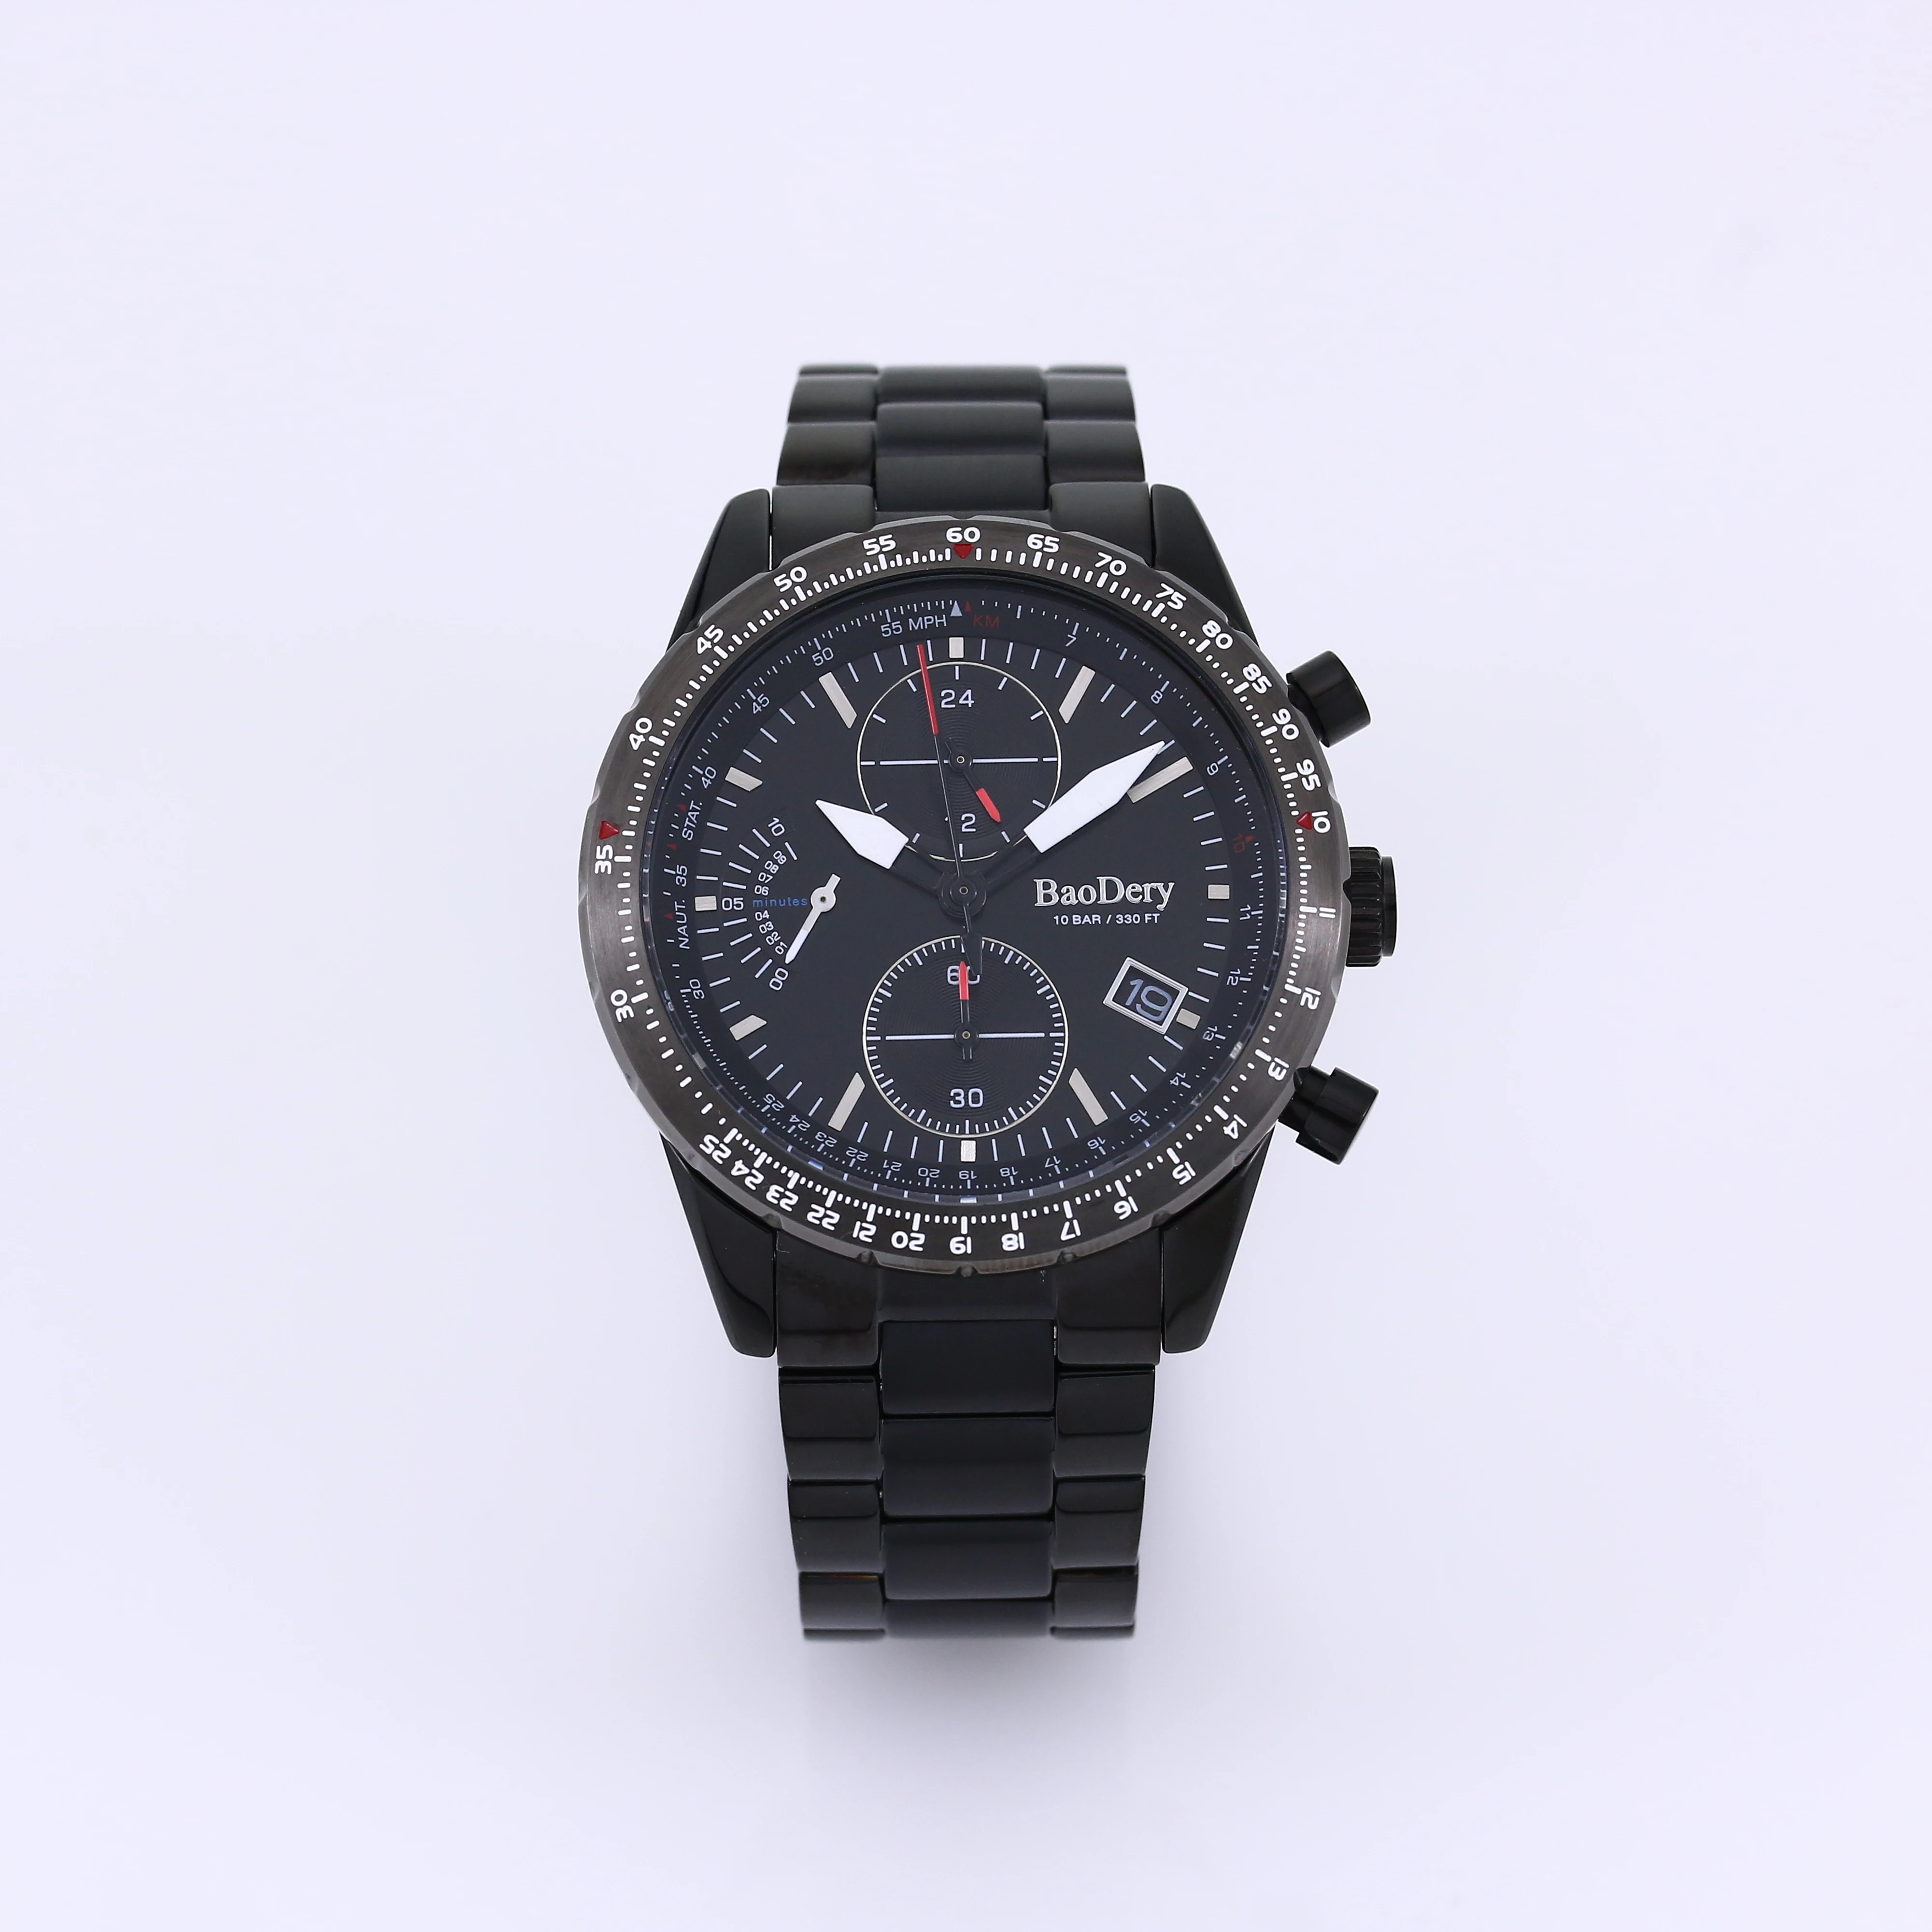 Optimize Your Time in Sporty-Chic Style - The 46mm Black Chronograph Watch with Day, Date and 24H Indicators! сумка поясная для бега it‘s your time на молнии